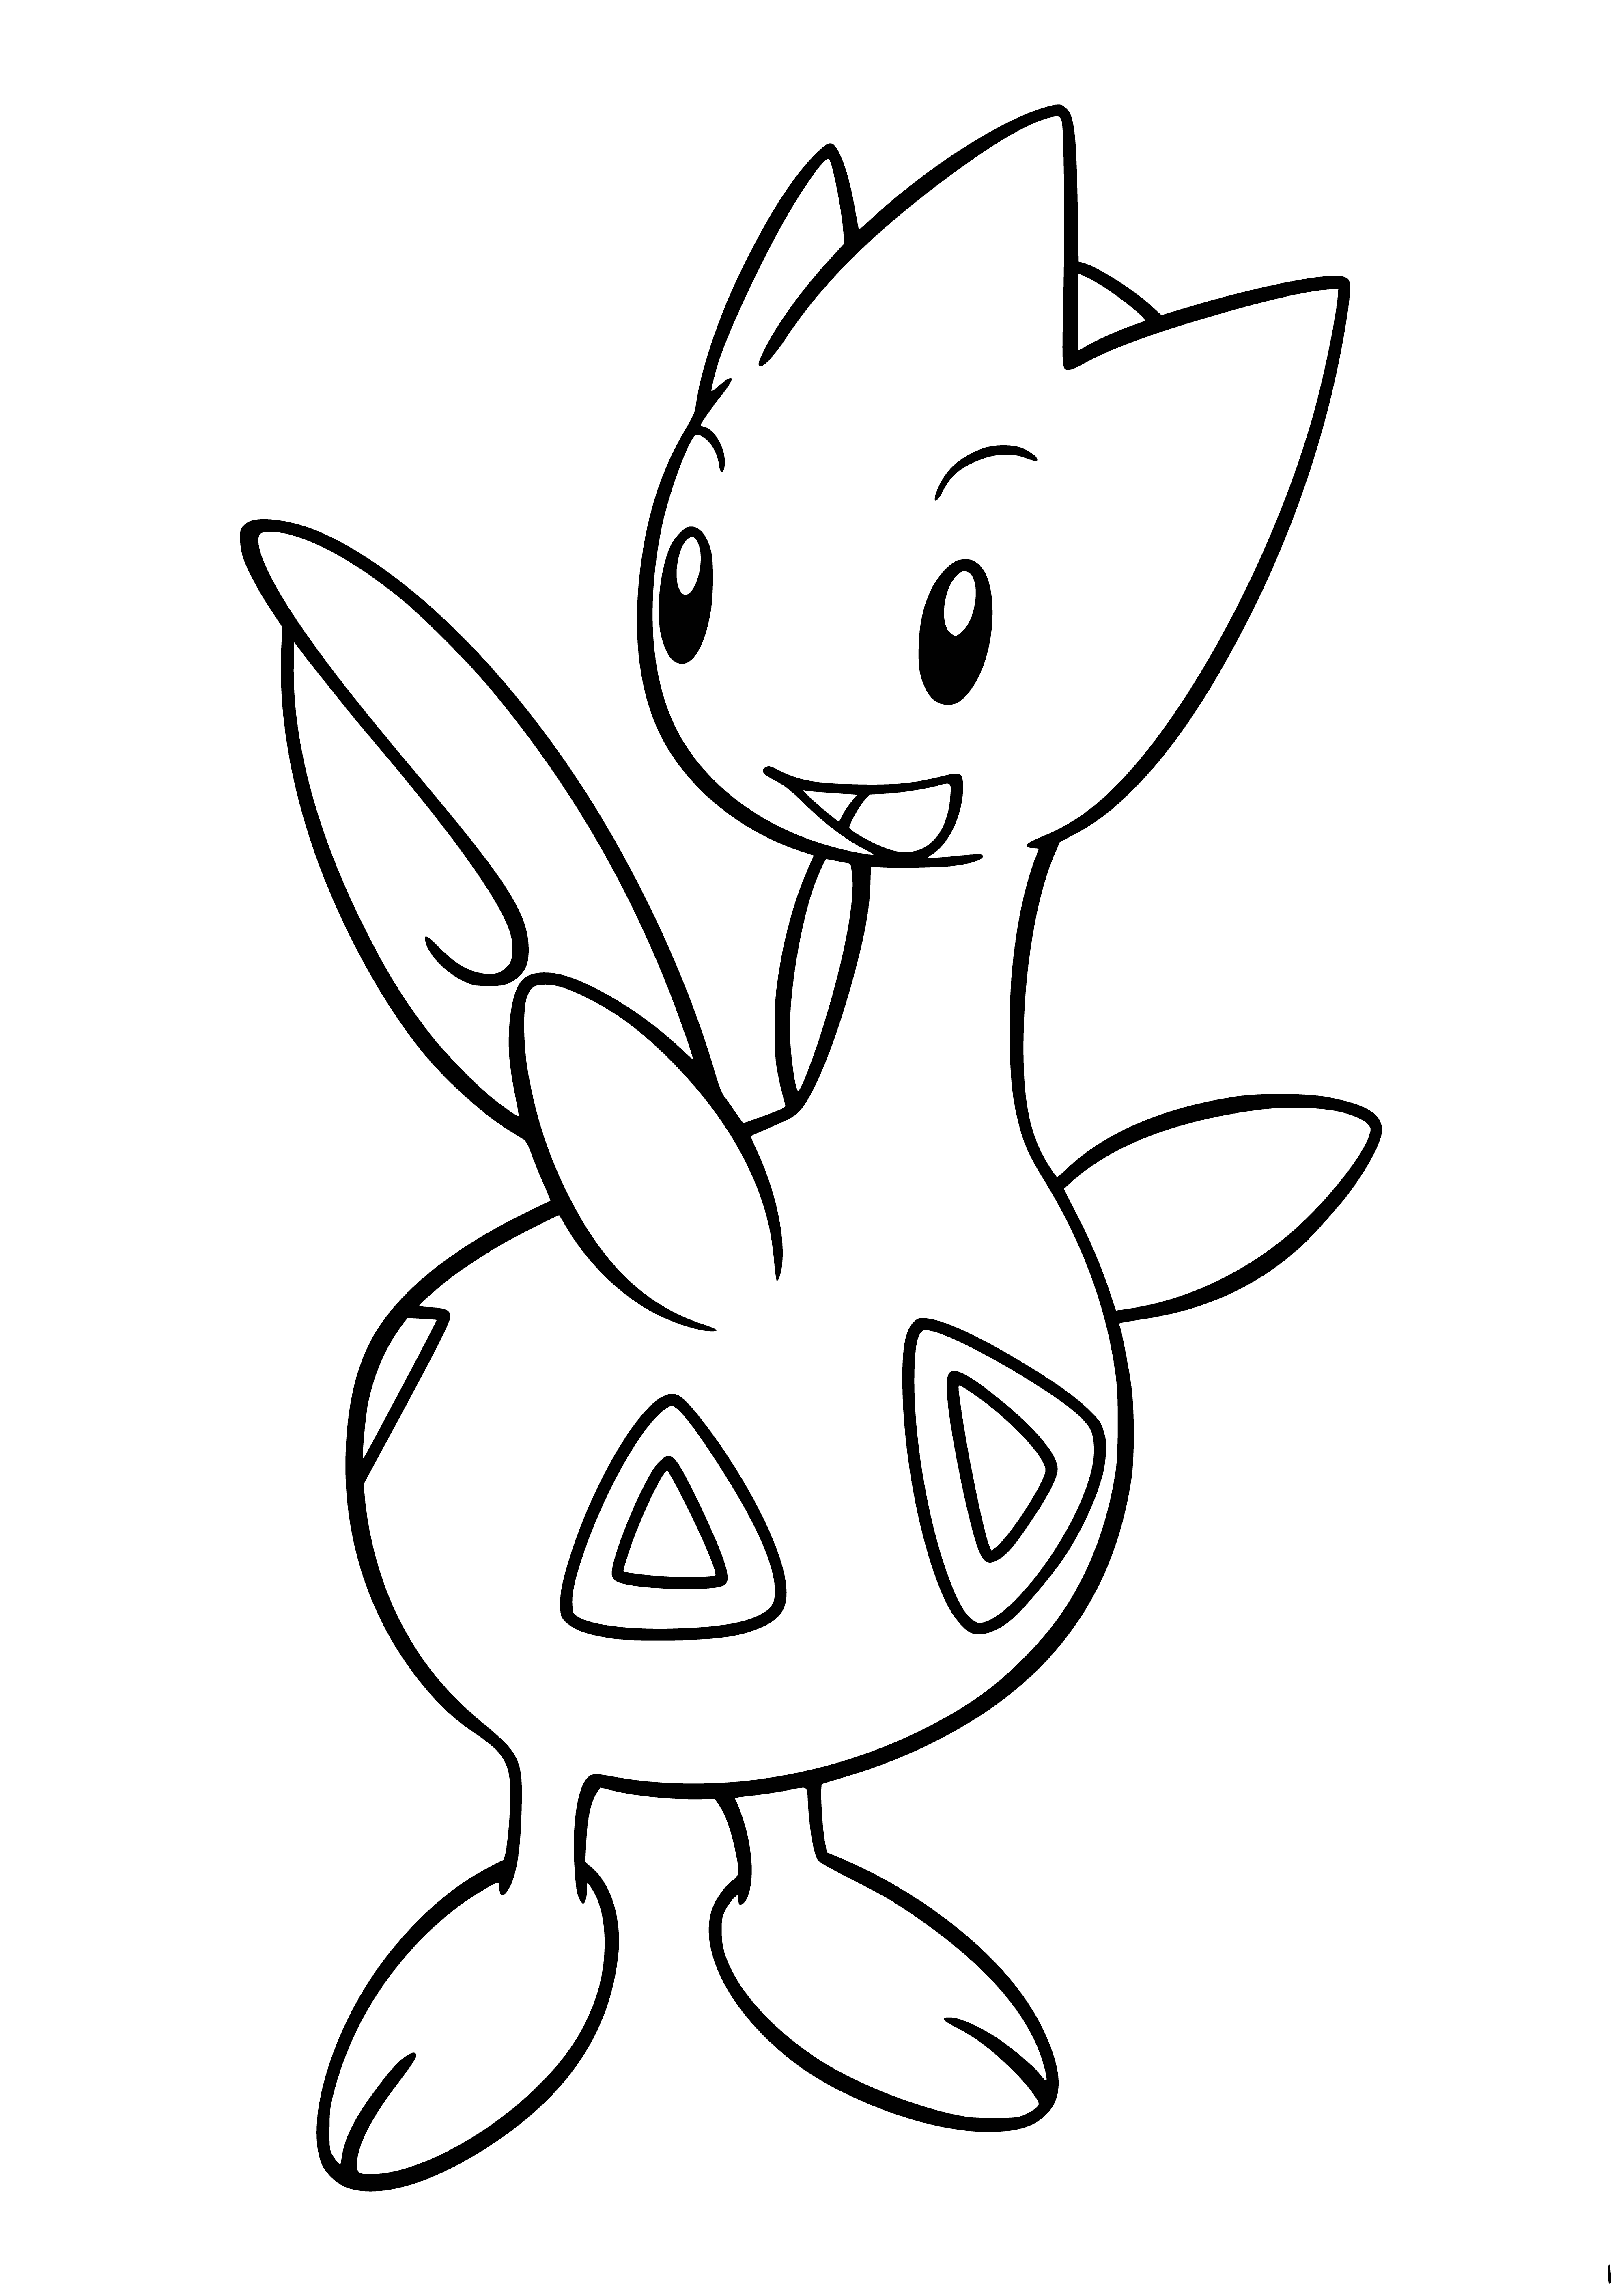 coloring page: Togetic, Fairy/Flying-type Pokemon, evolves from Togepi; white w/ red-striped belly, blue spots/crest. Learns Fly & Metronome.